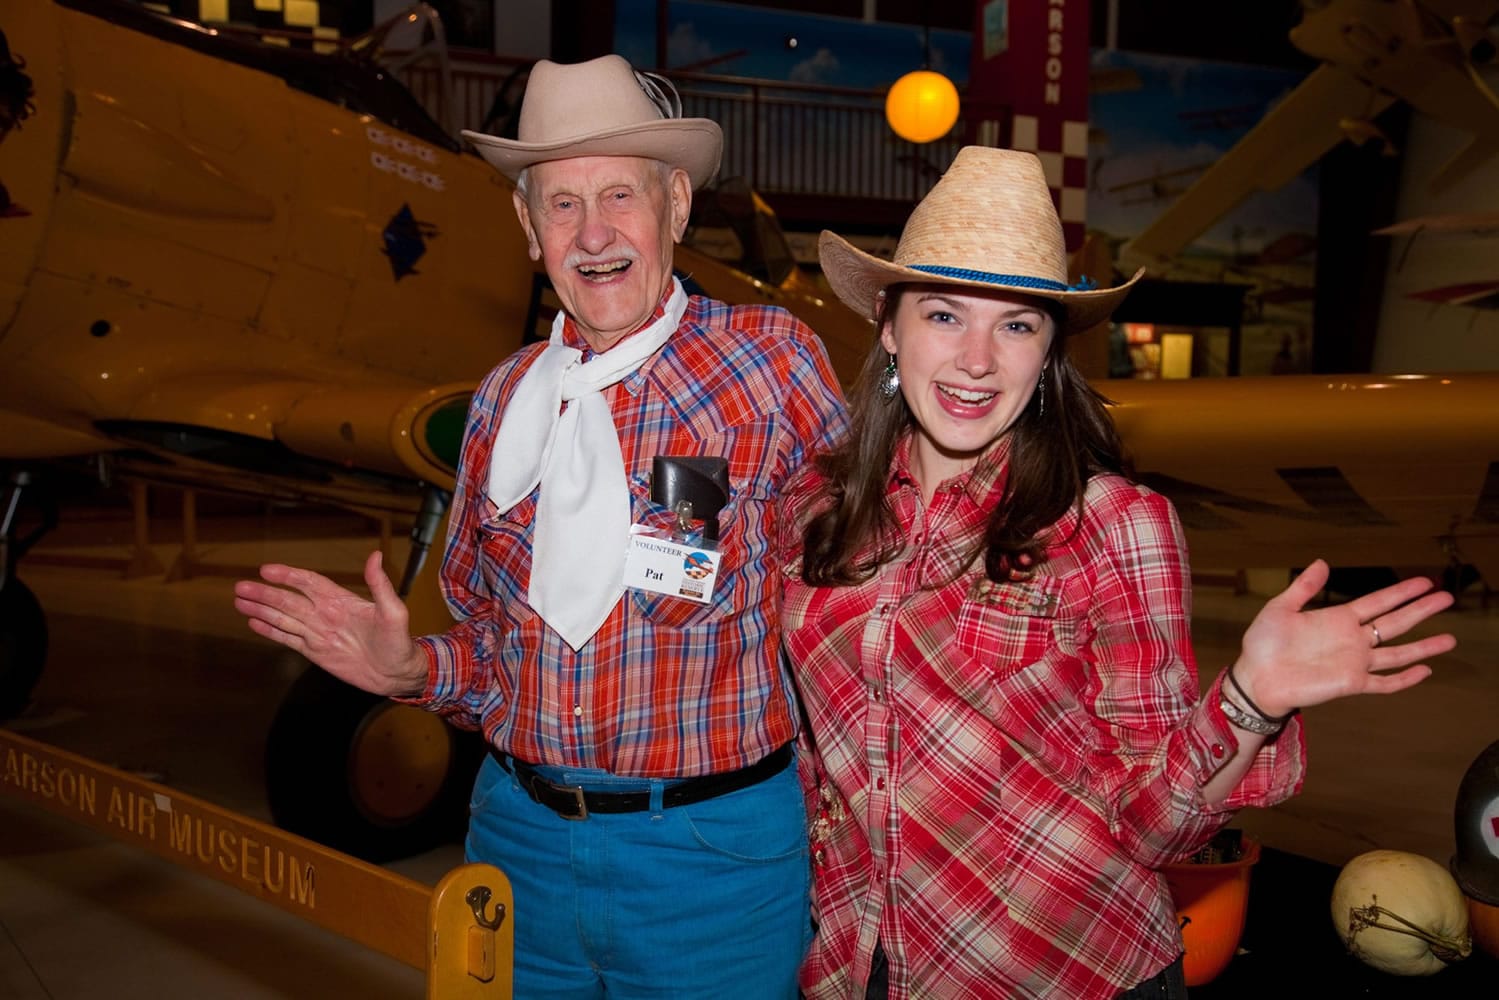 Hudson's Bay: Pat Sutherland, left, a volunteer at the Pearson Air Museum, and Nicole Knotts, an employee at the Fort Vancouver visitor center bookstore, pose at Pearson's Aviation Harvest Day celebration on Oct.